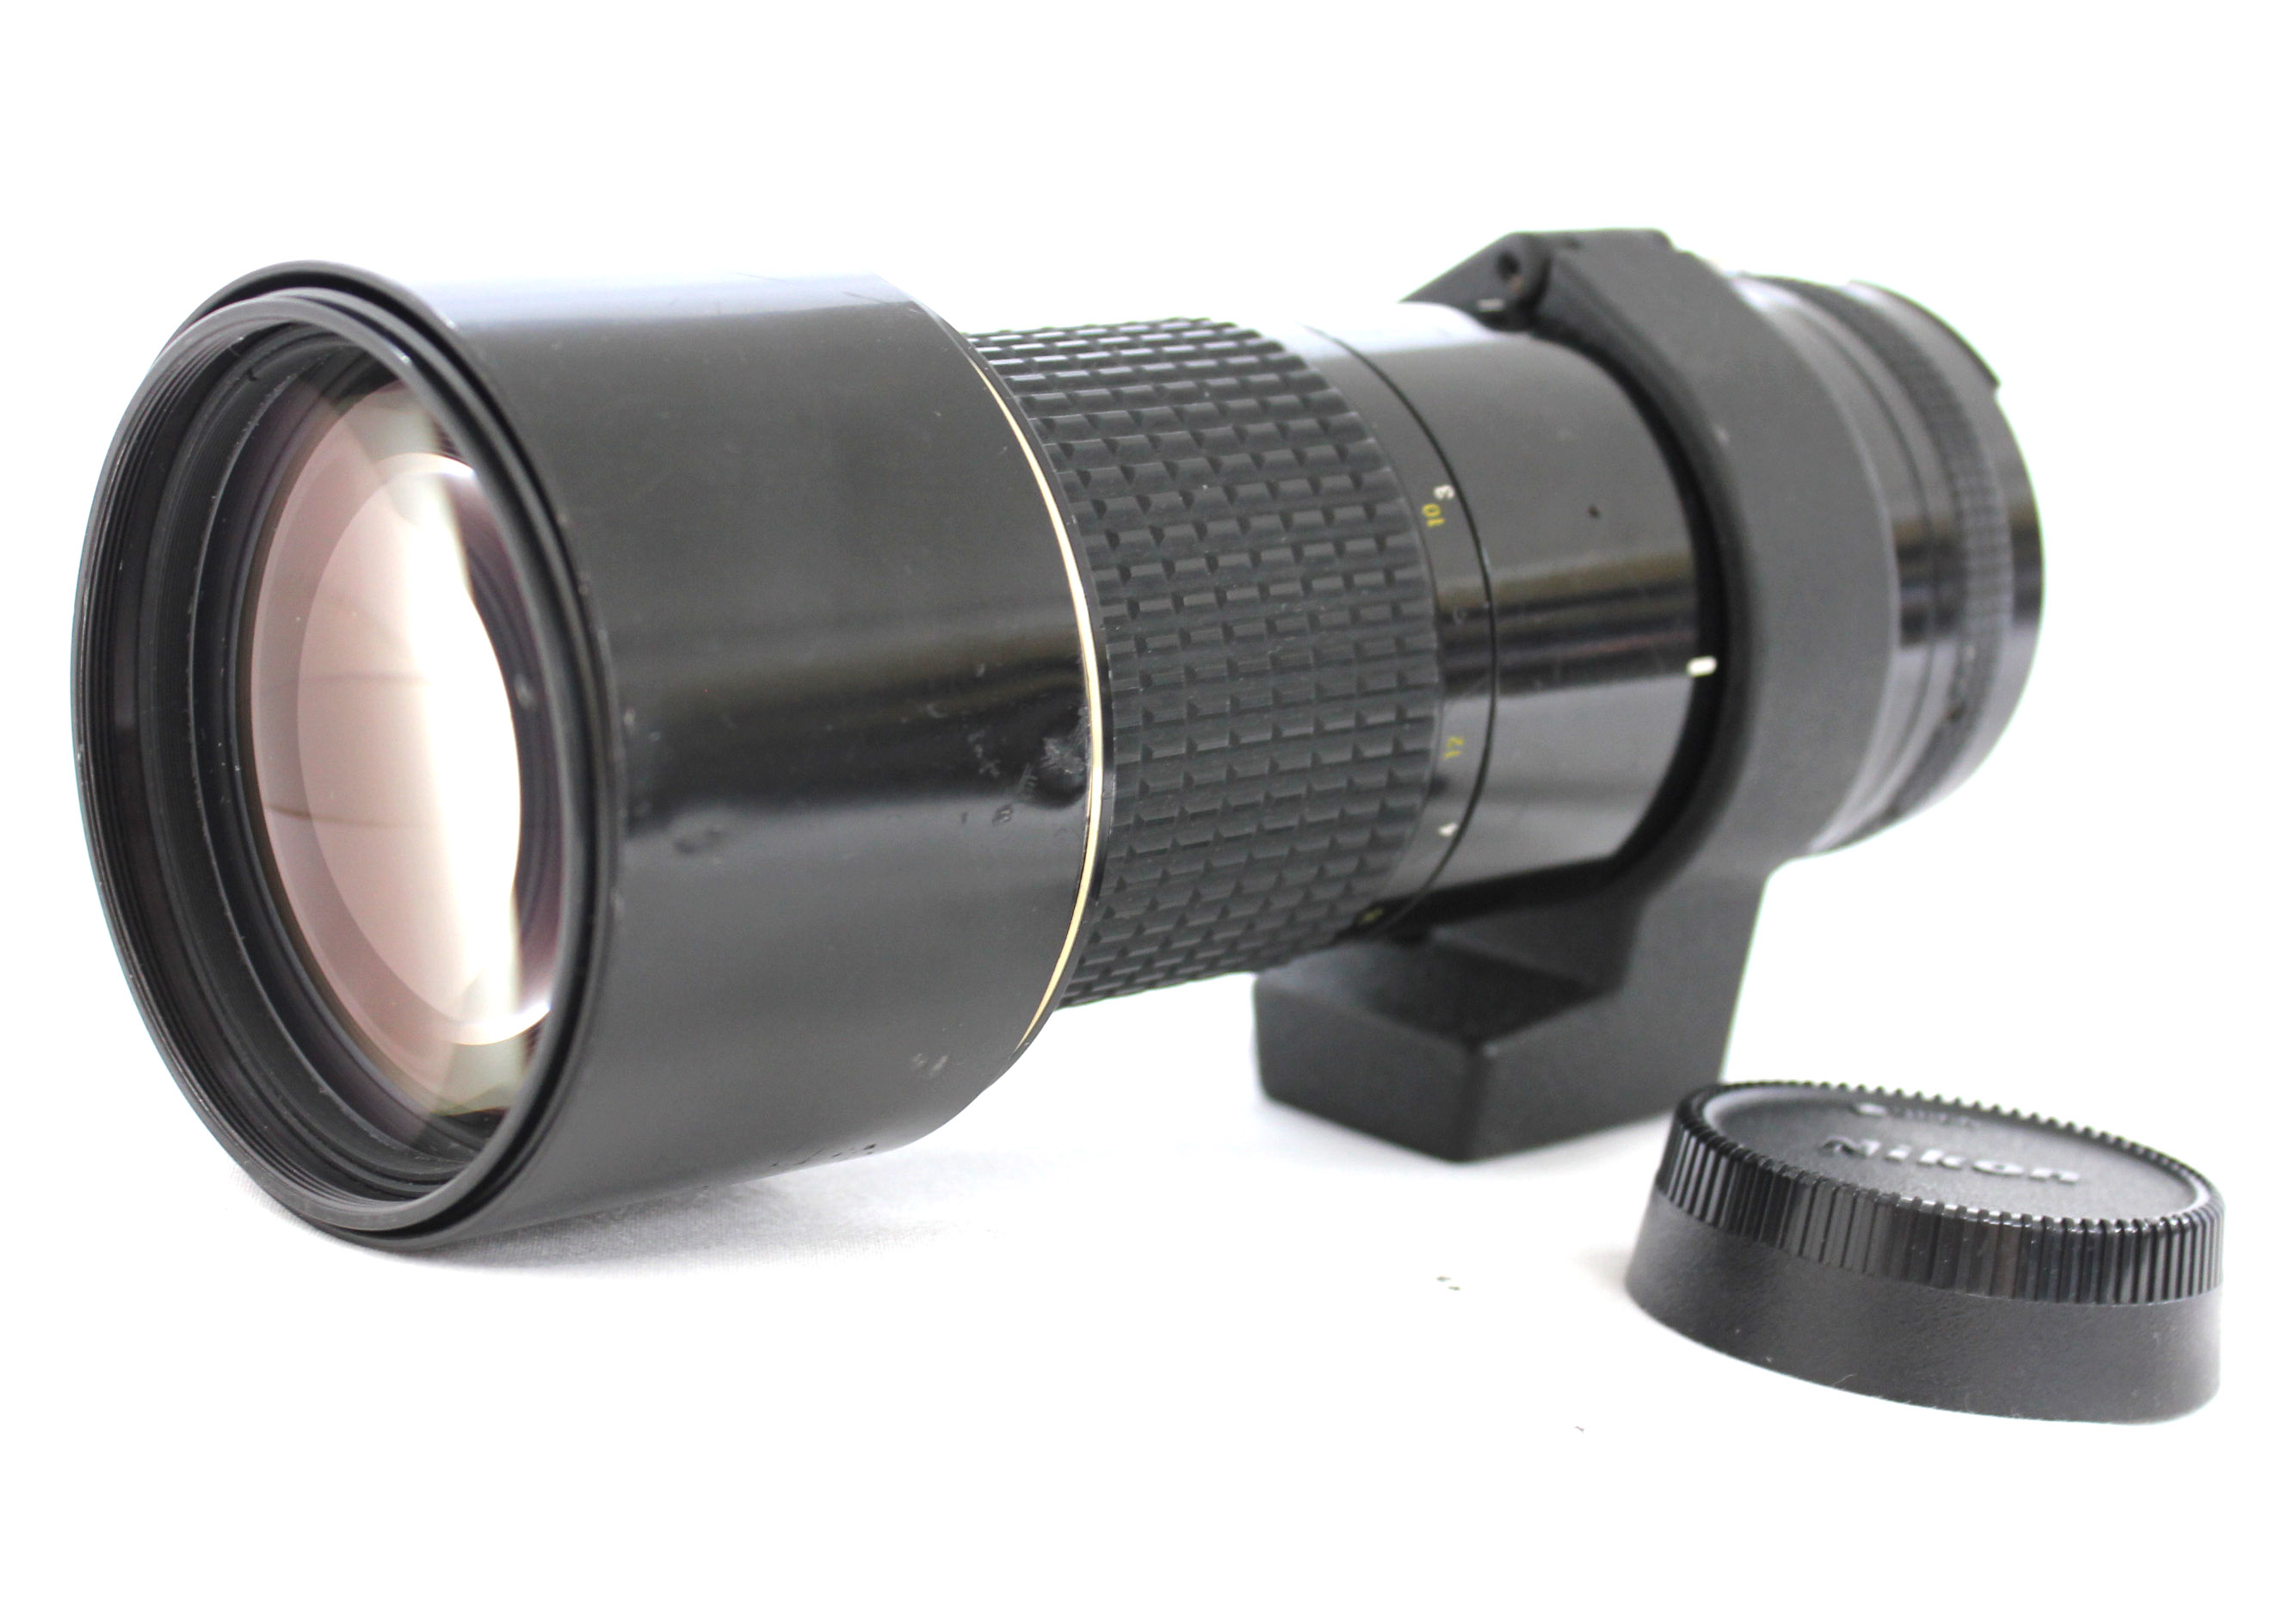 Japan Used Camera Shop | [Excellent++++] Nikon Ai Nikkor ED IF 300mm F/4.5 MF Telephoto Lens F Mount from Japan